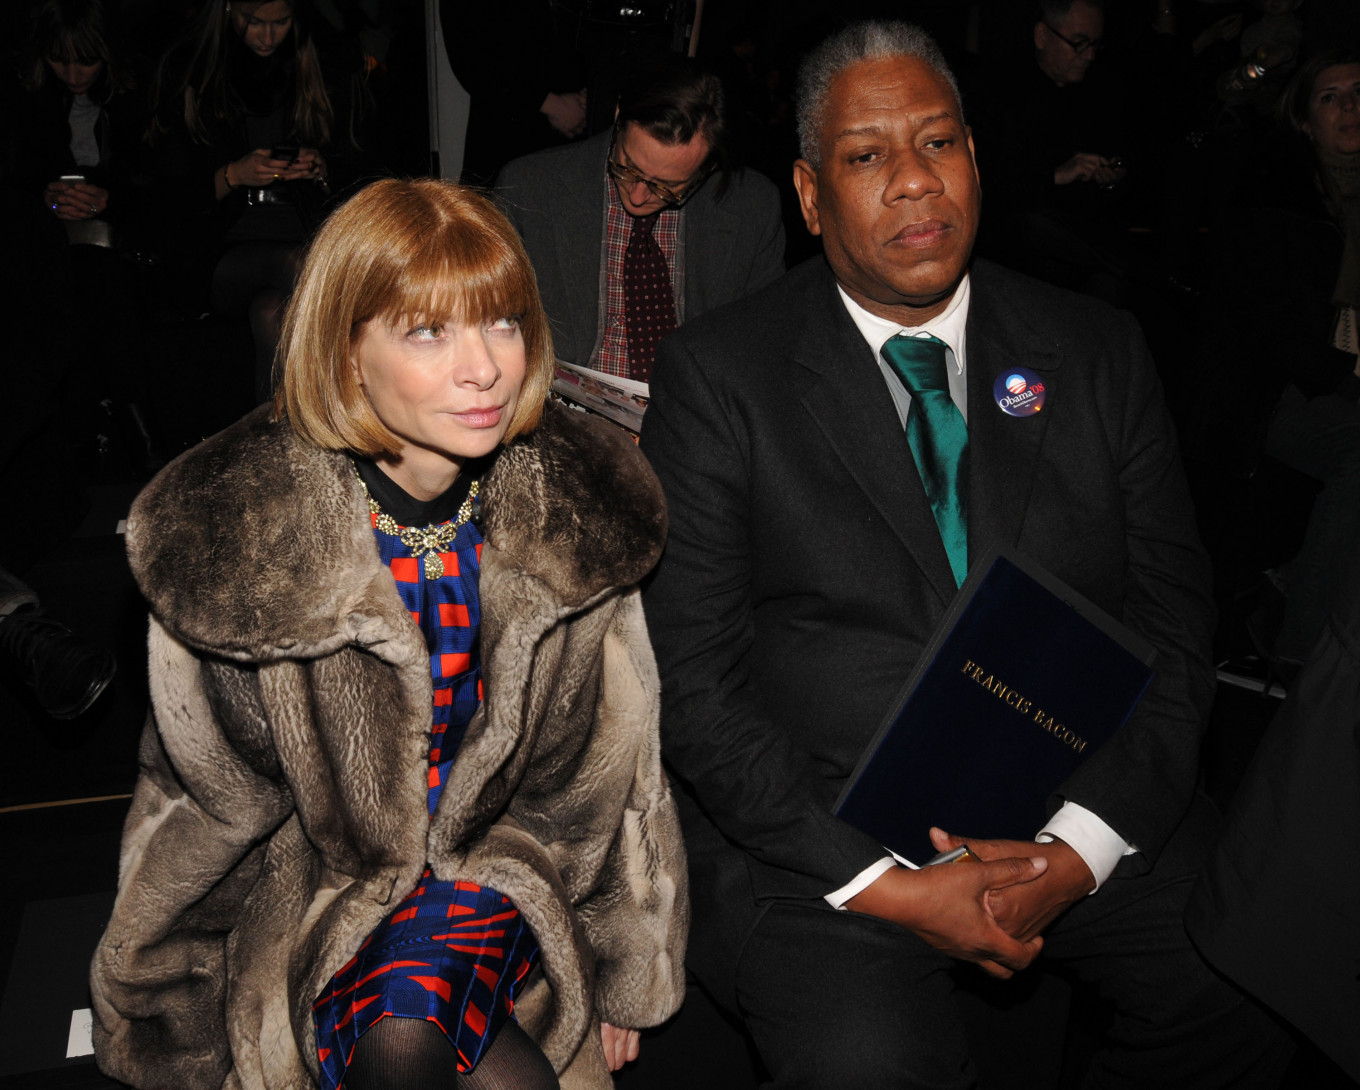 American editor-at-large for Vogue magazine Andre Leon Talley (L) and Editor-in-chief of American Vogue Anna Wintour attend the Donna Karan Collection Fall 2008 fashion show during Mercedes-Benz Fashion Week Fall 2008 on February 8, 2008 in New York City. (AFP/Bryan Bedder) This article was published in thejakartapost.com with the title "André Leon Talley lashes at ‘ruthless’ Anna Wintour in upcoming memoir". Click to read: https://www.thejakartapost.com/life/2020/04/26/andr-leon-talley-lashes-at-ruthless-anna-wintour-in-upcoming-memoir.html. Download The Jakarta Post app for easier and faster news access: Android: https://bit.ly/tjp-android iOS: https://bit.ly/tjp-ios